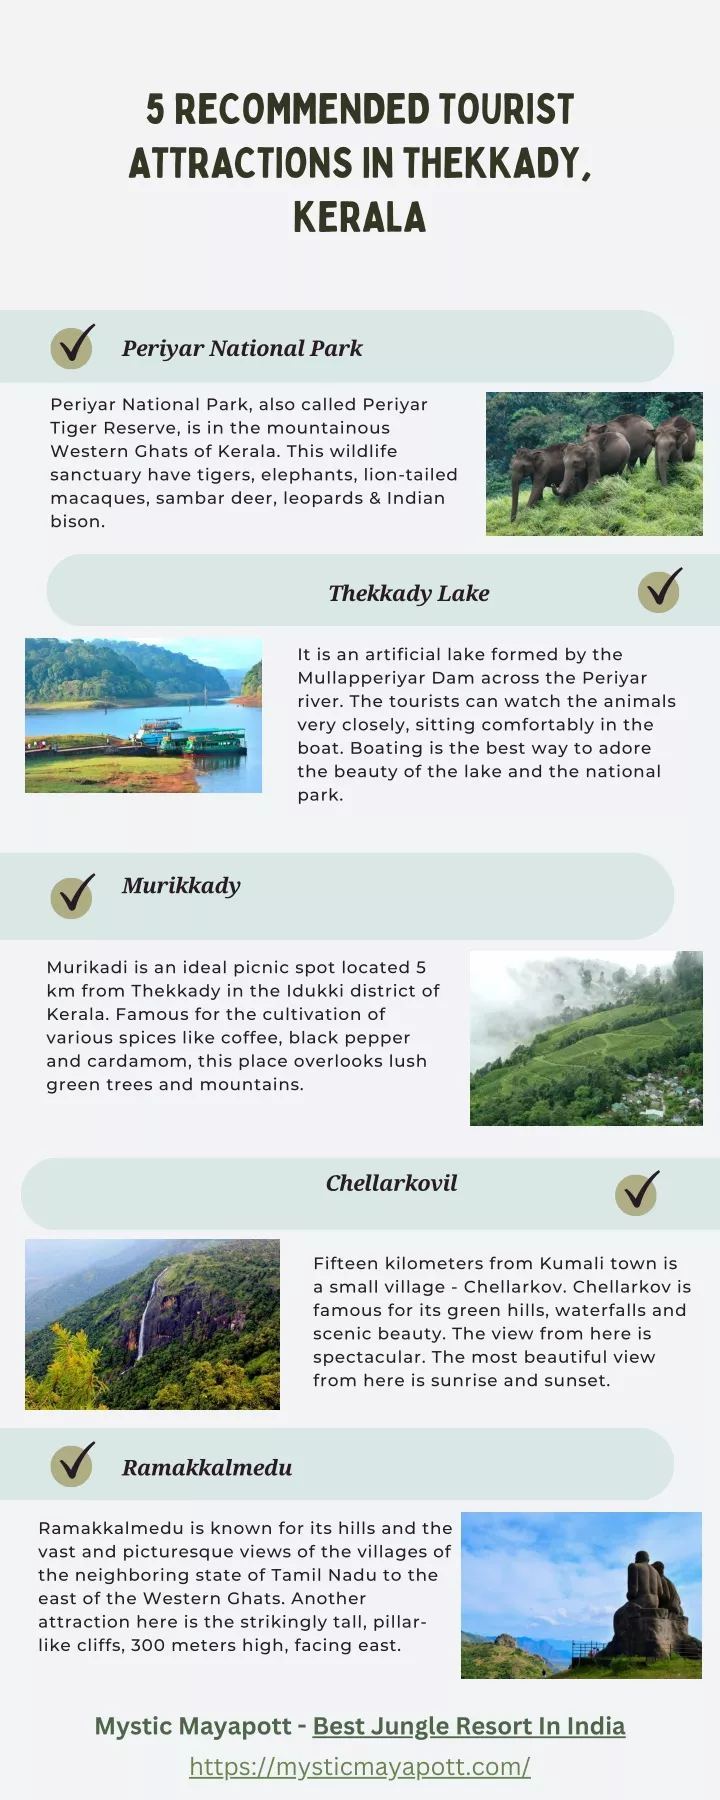 5 recommended tourist attractions in thekkady